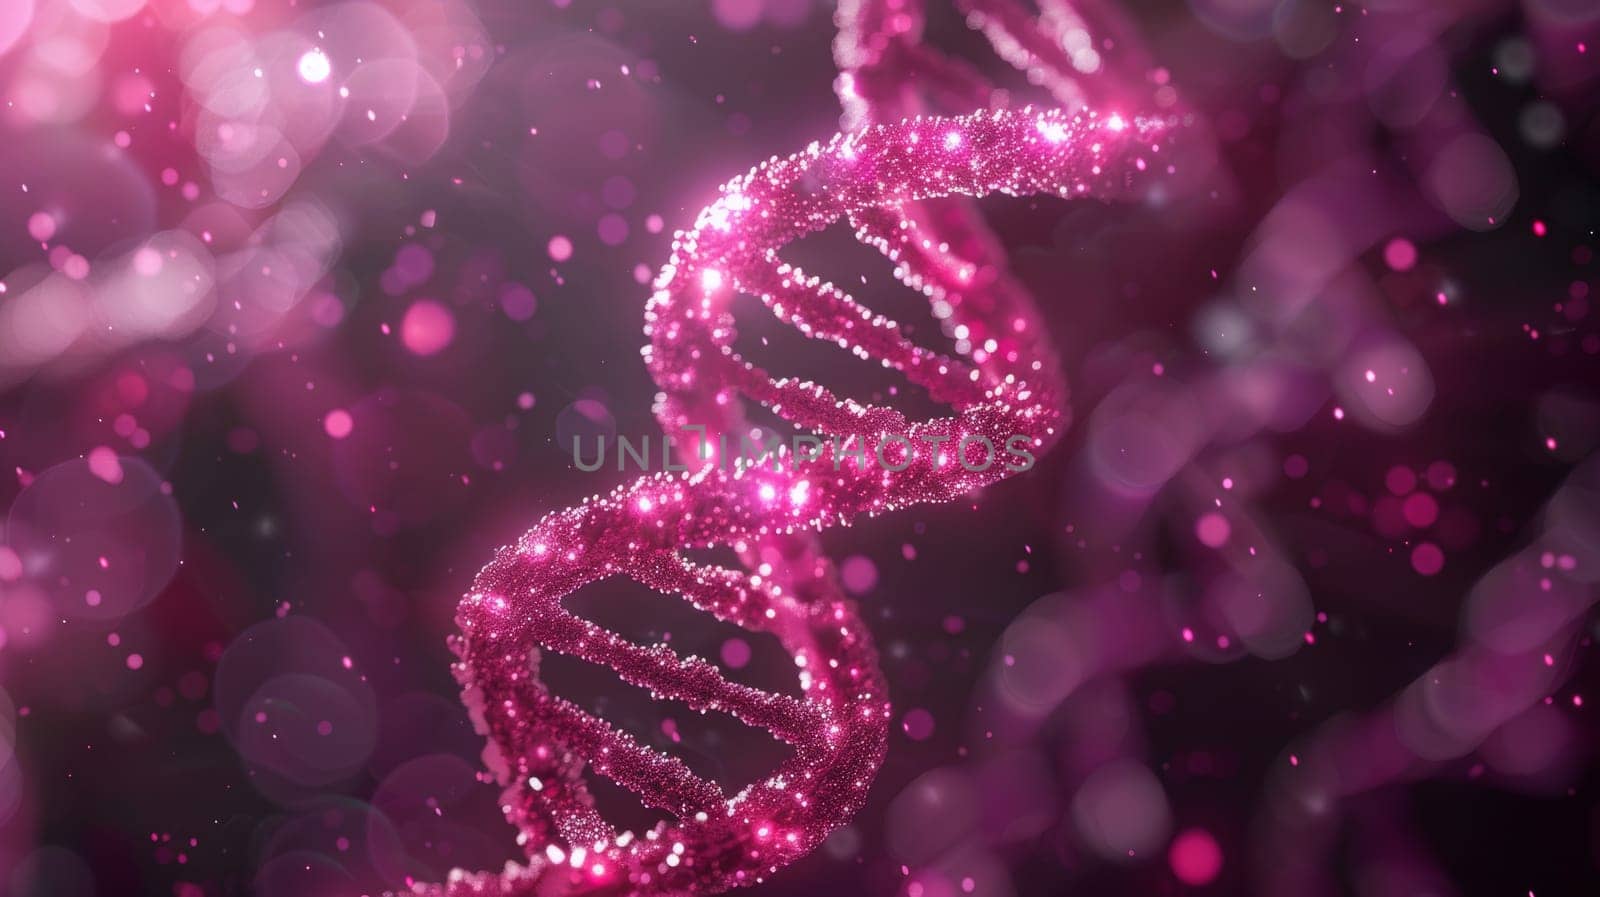 Glowing pink DNA double helix strands with bokeh background. Concept of genetic engineering, science research, and discovery.